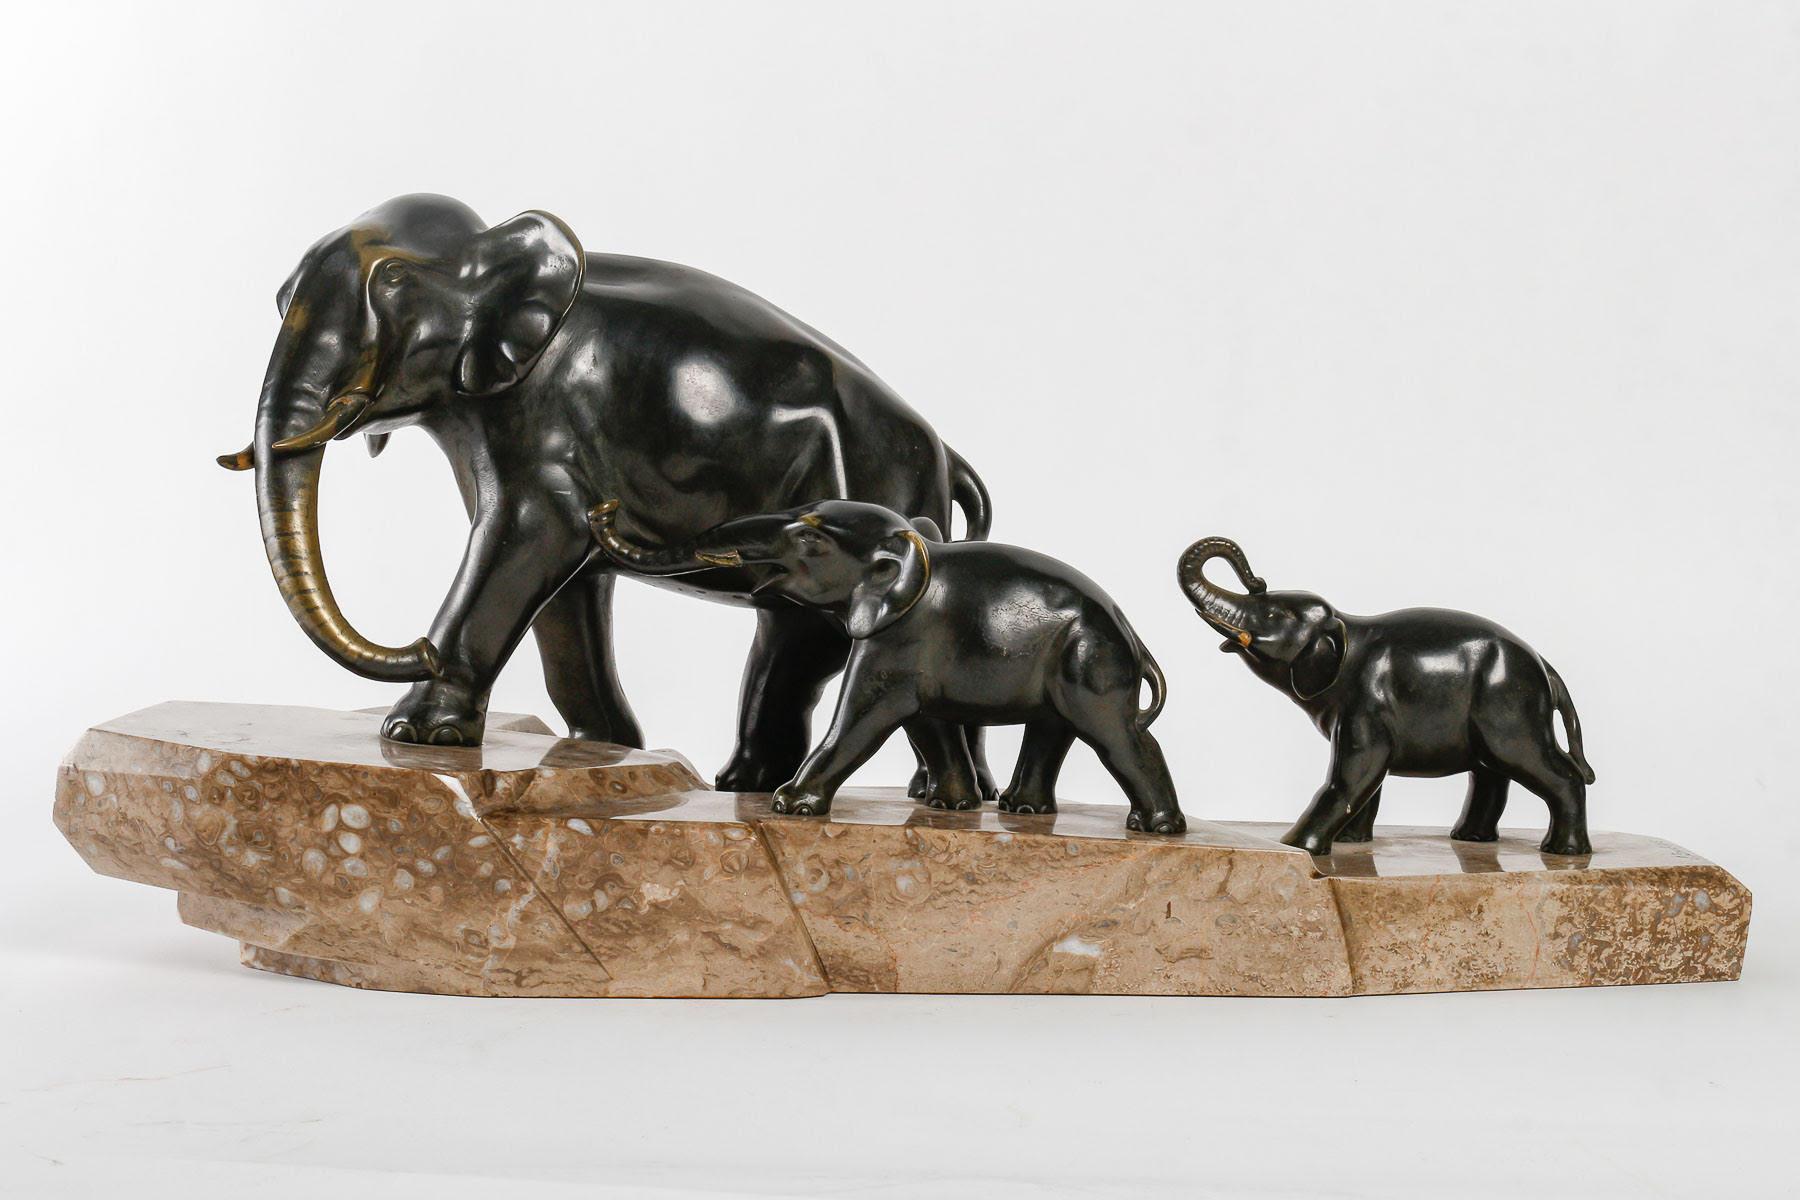 Sculpture, Animal bronze by J.Brault, Early 20th century.

Animal bronze by J.Brault, early 20th century, representing an elephant and its young, marble base, Art Deco.  
H: 31cm, W: 61cm, D: 20cm